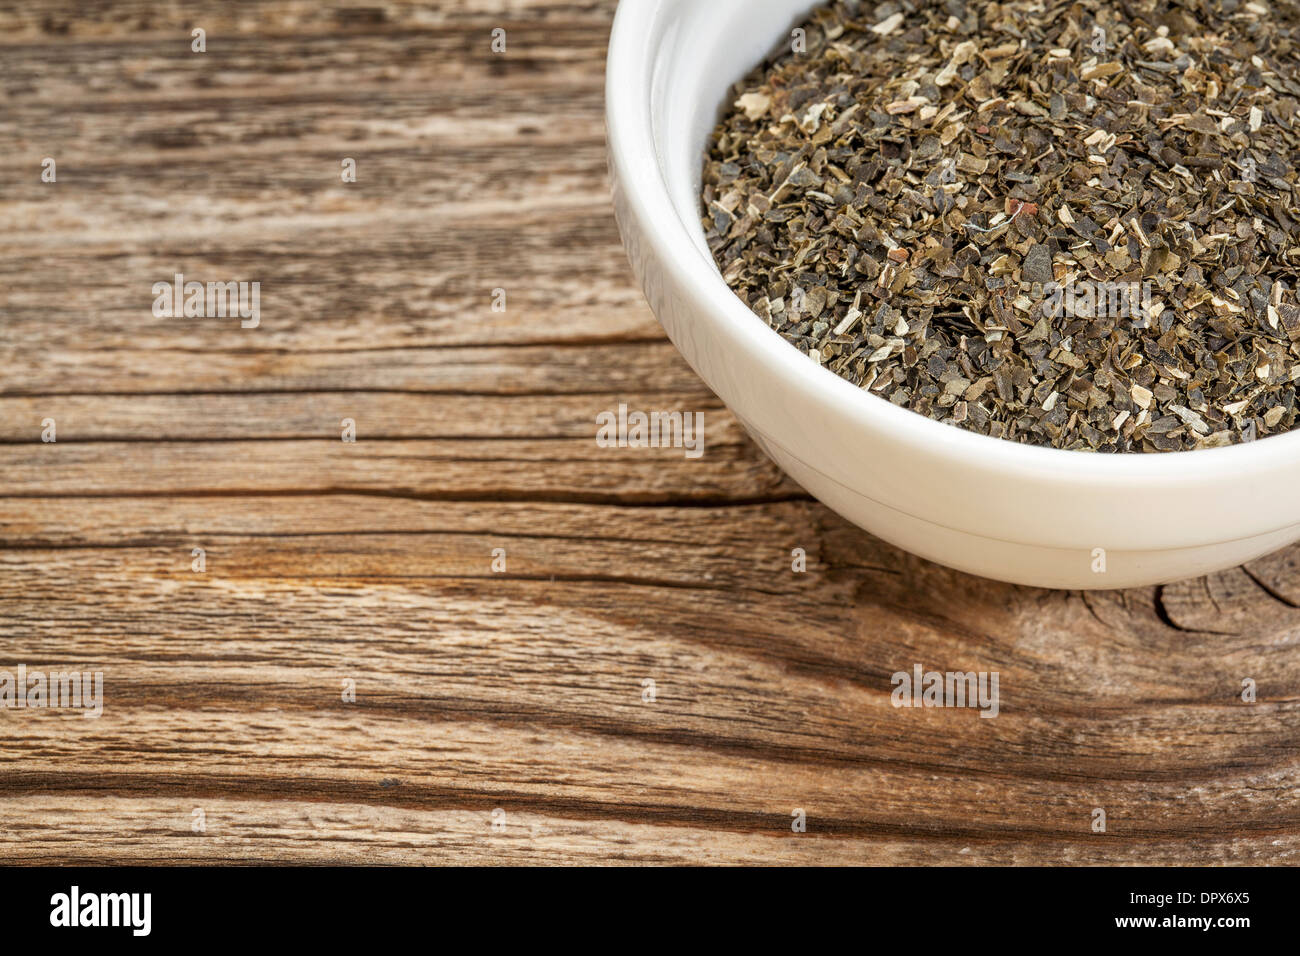 a bowl of wakame seaweed against grained wood with copy space Stock Photo